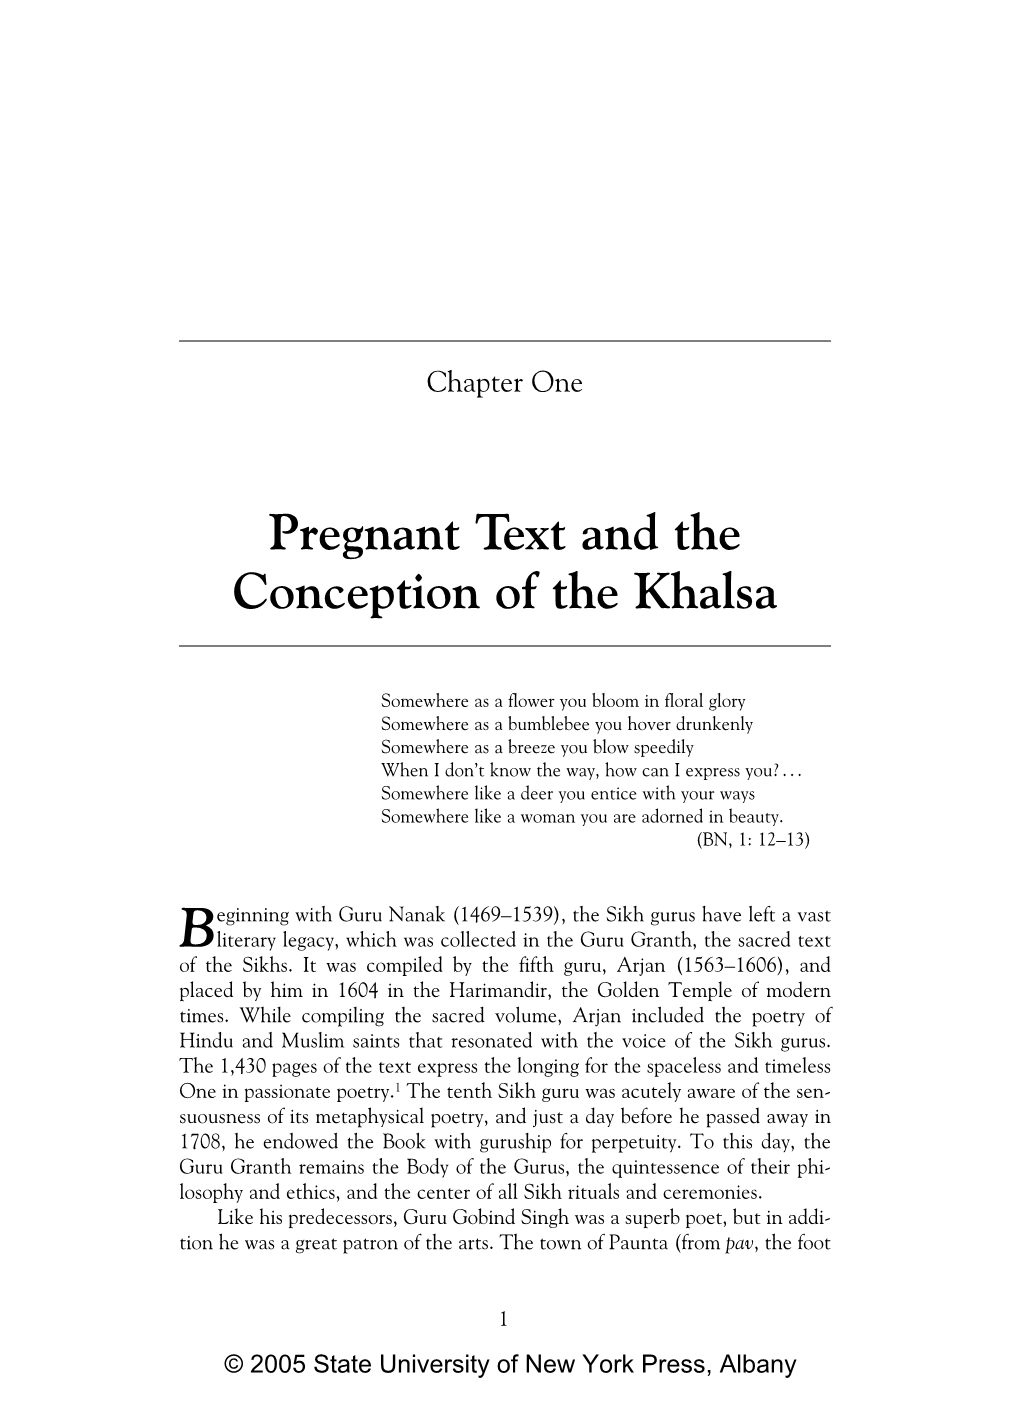 Pregnant Text and the Conception of the Khalsa